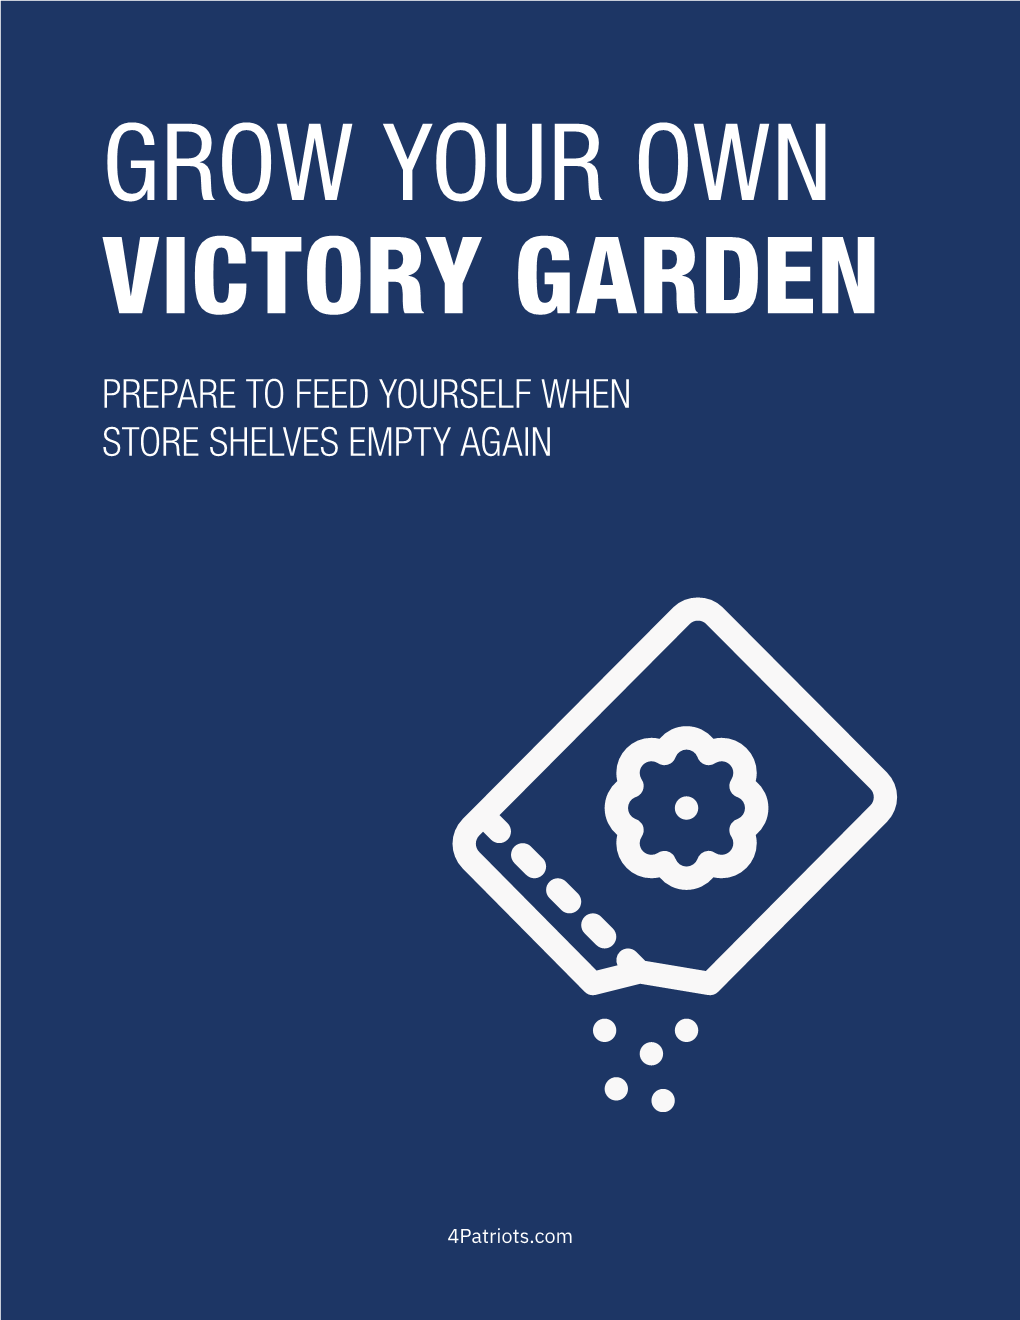 Grow Your Own Victory Garden Prepare to Feed Yourself When Store Shelves Empty Again